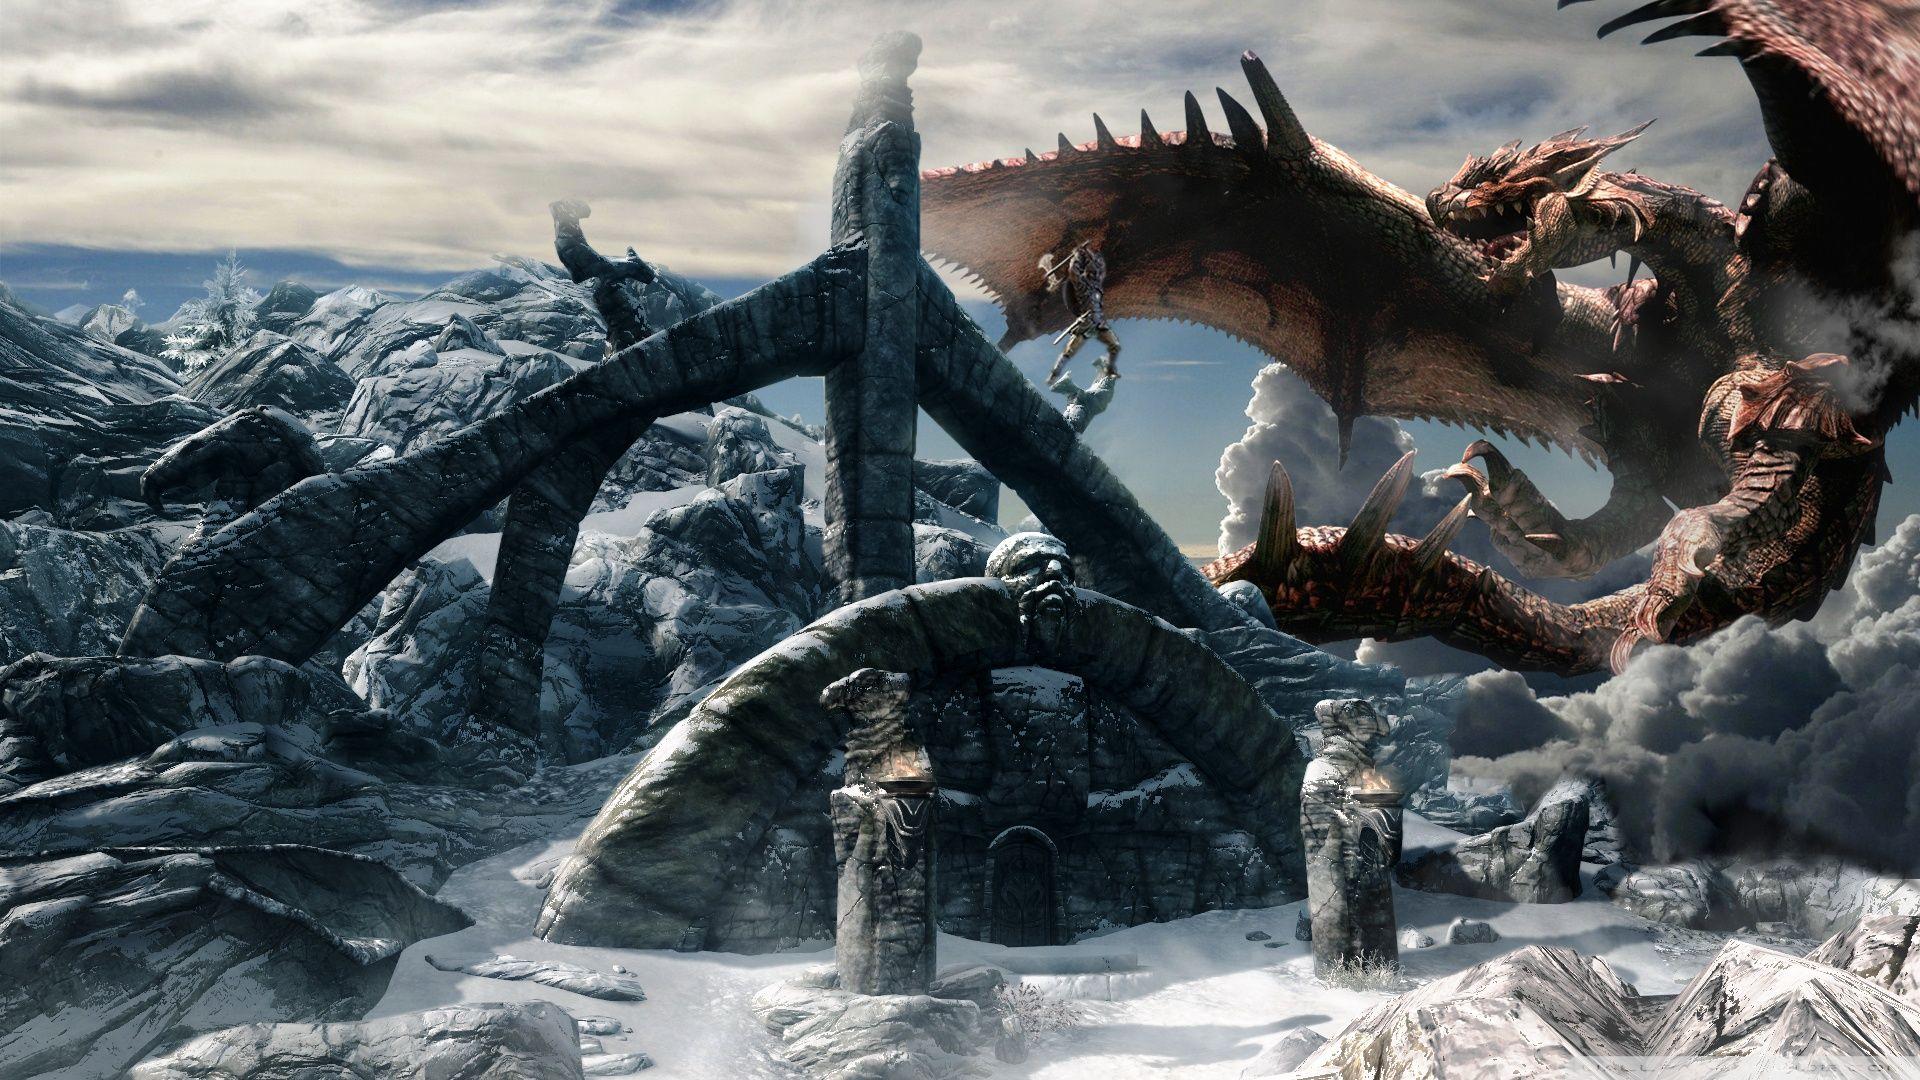 Featured image of post Skyrim Dragon Wallpaper Hd - Images hd dragon skyrim wallpapers.